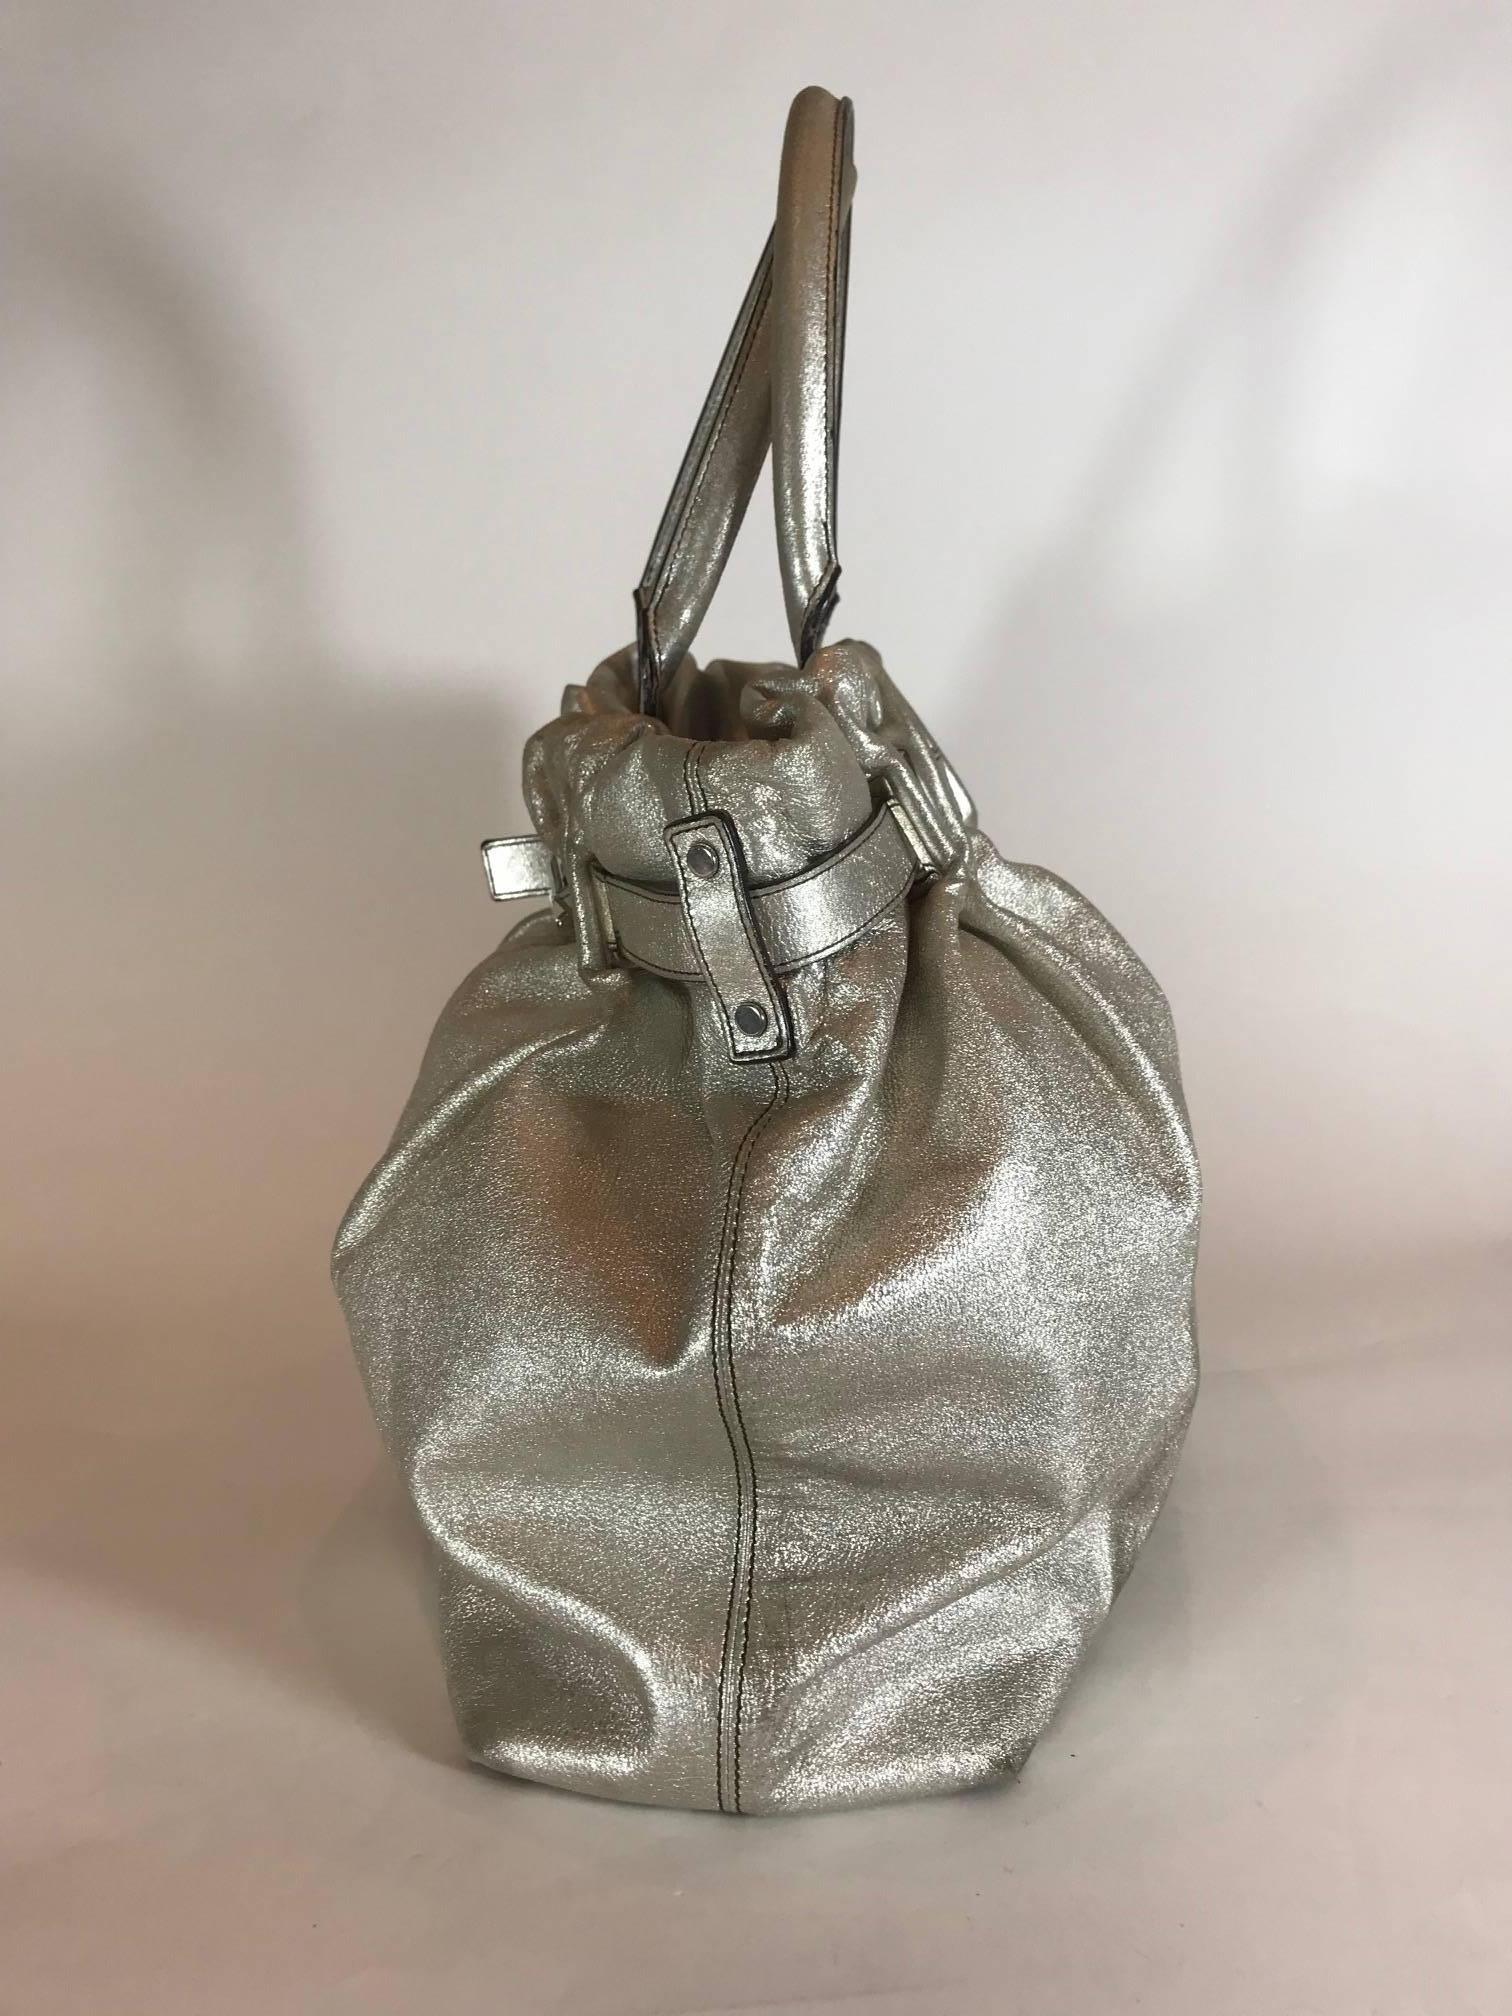 Lanvin Metallic Kentucky Tote In Excellent Condition For Sale In Roslyn, NY